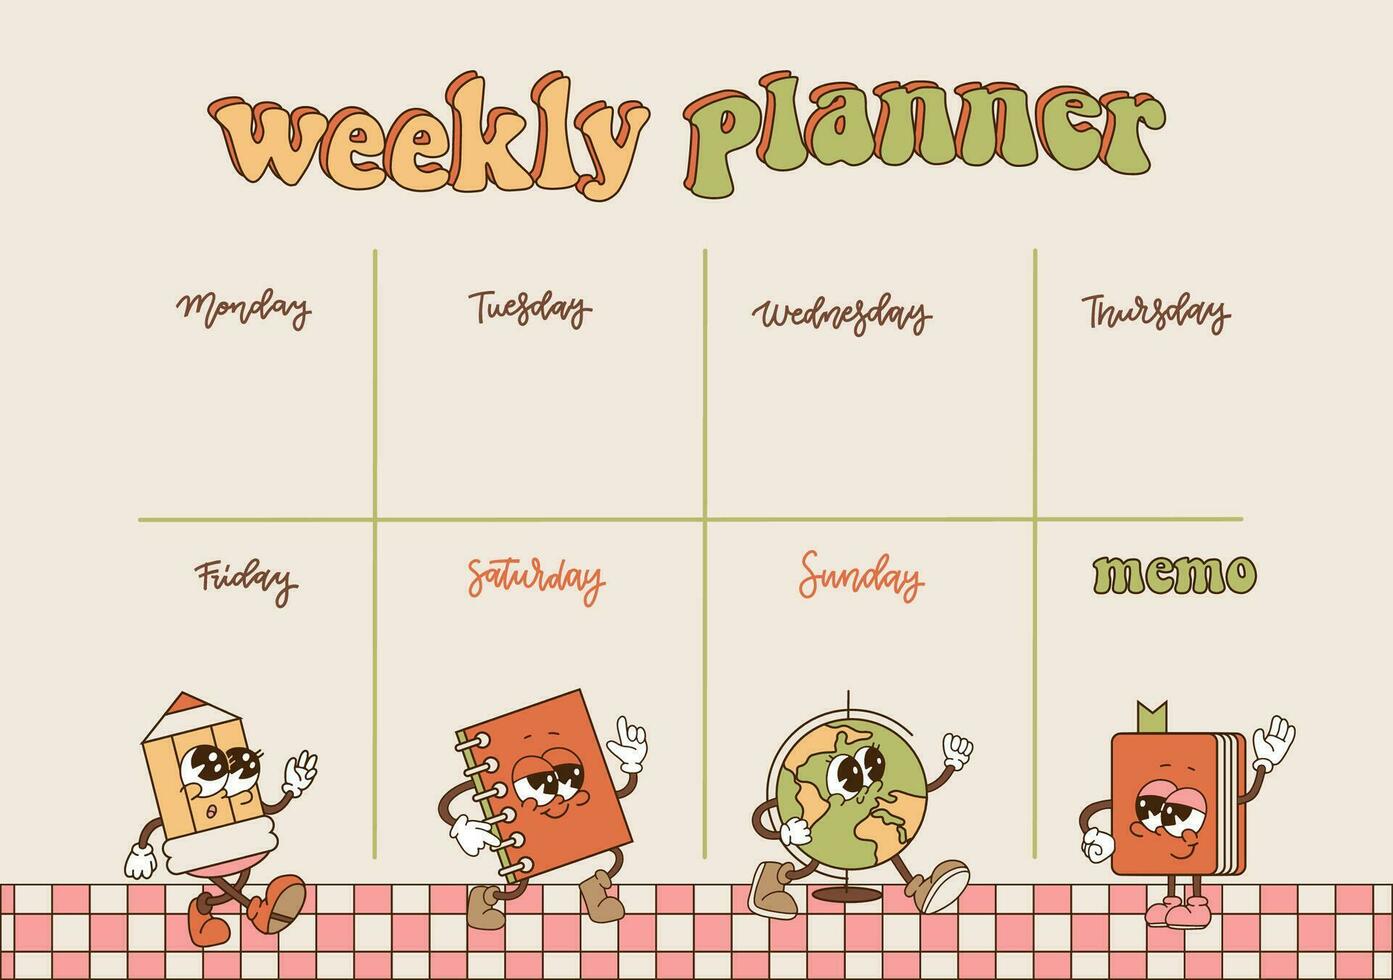 Weekly planner template . Groovy schedule in Retro 70s style, note paper decorated with retro cartoon stationery characters, Vintage organizer. Vector flat contour illustration.